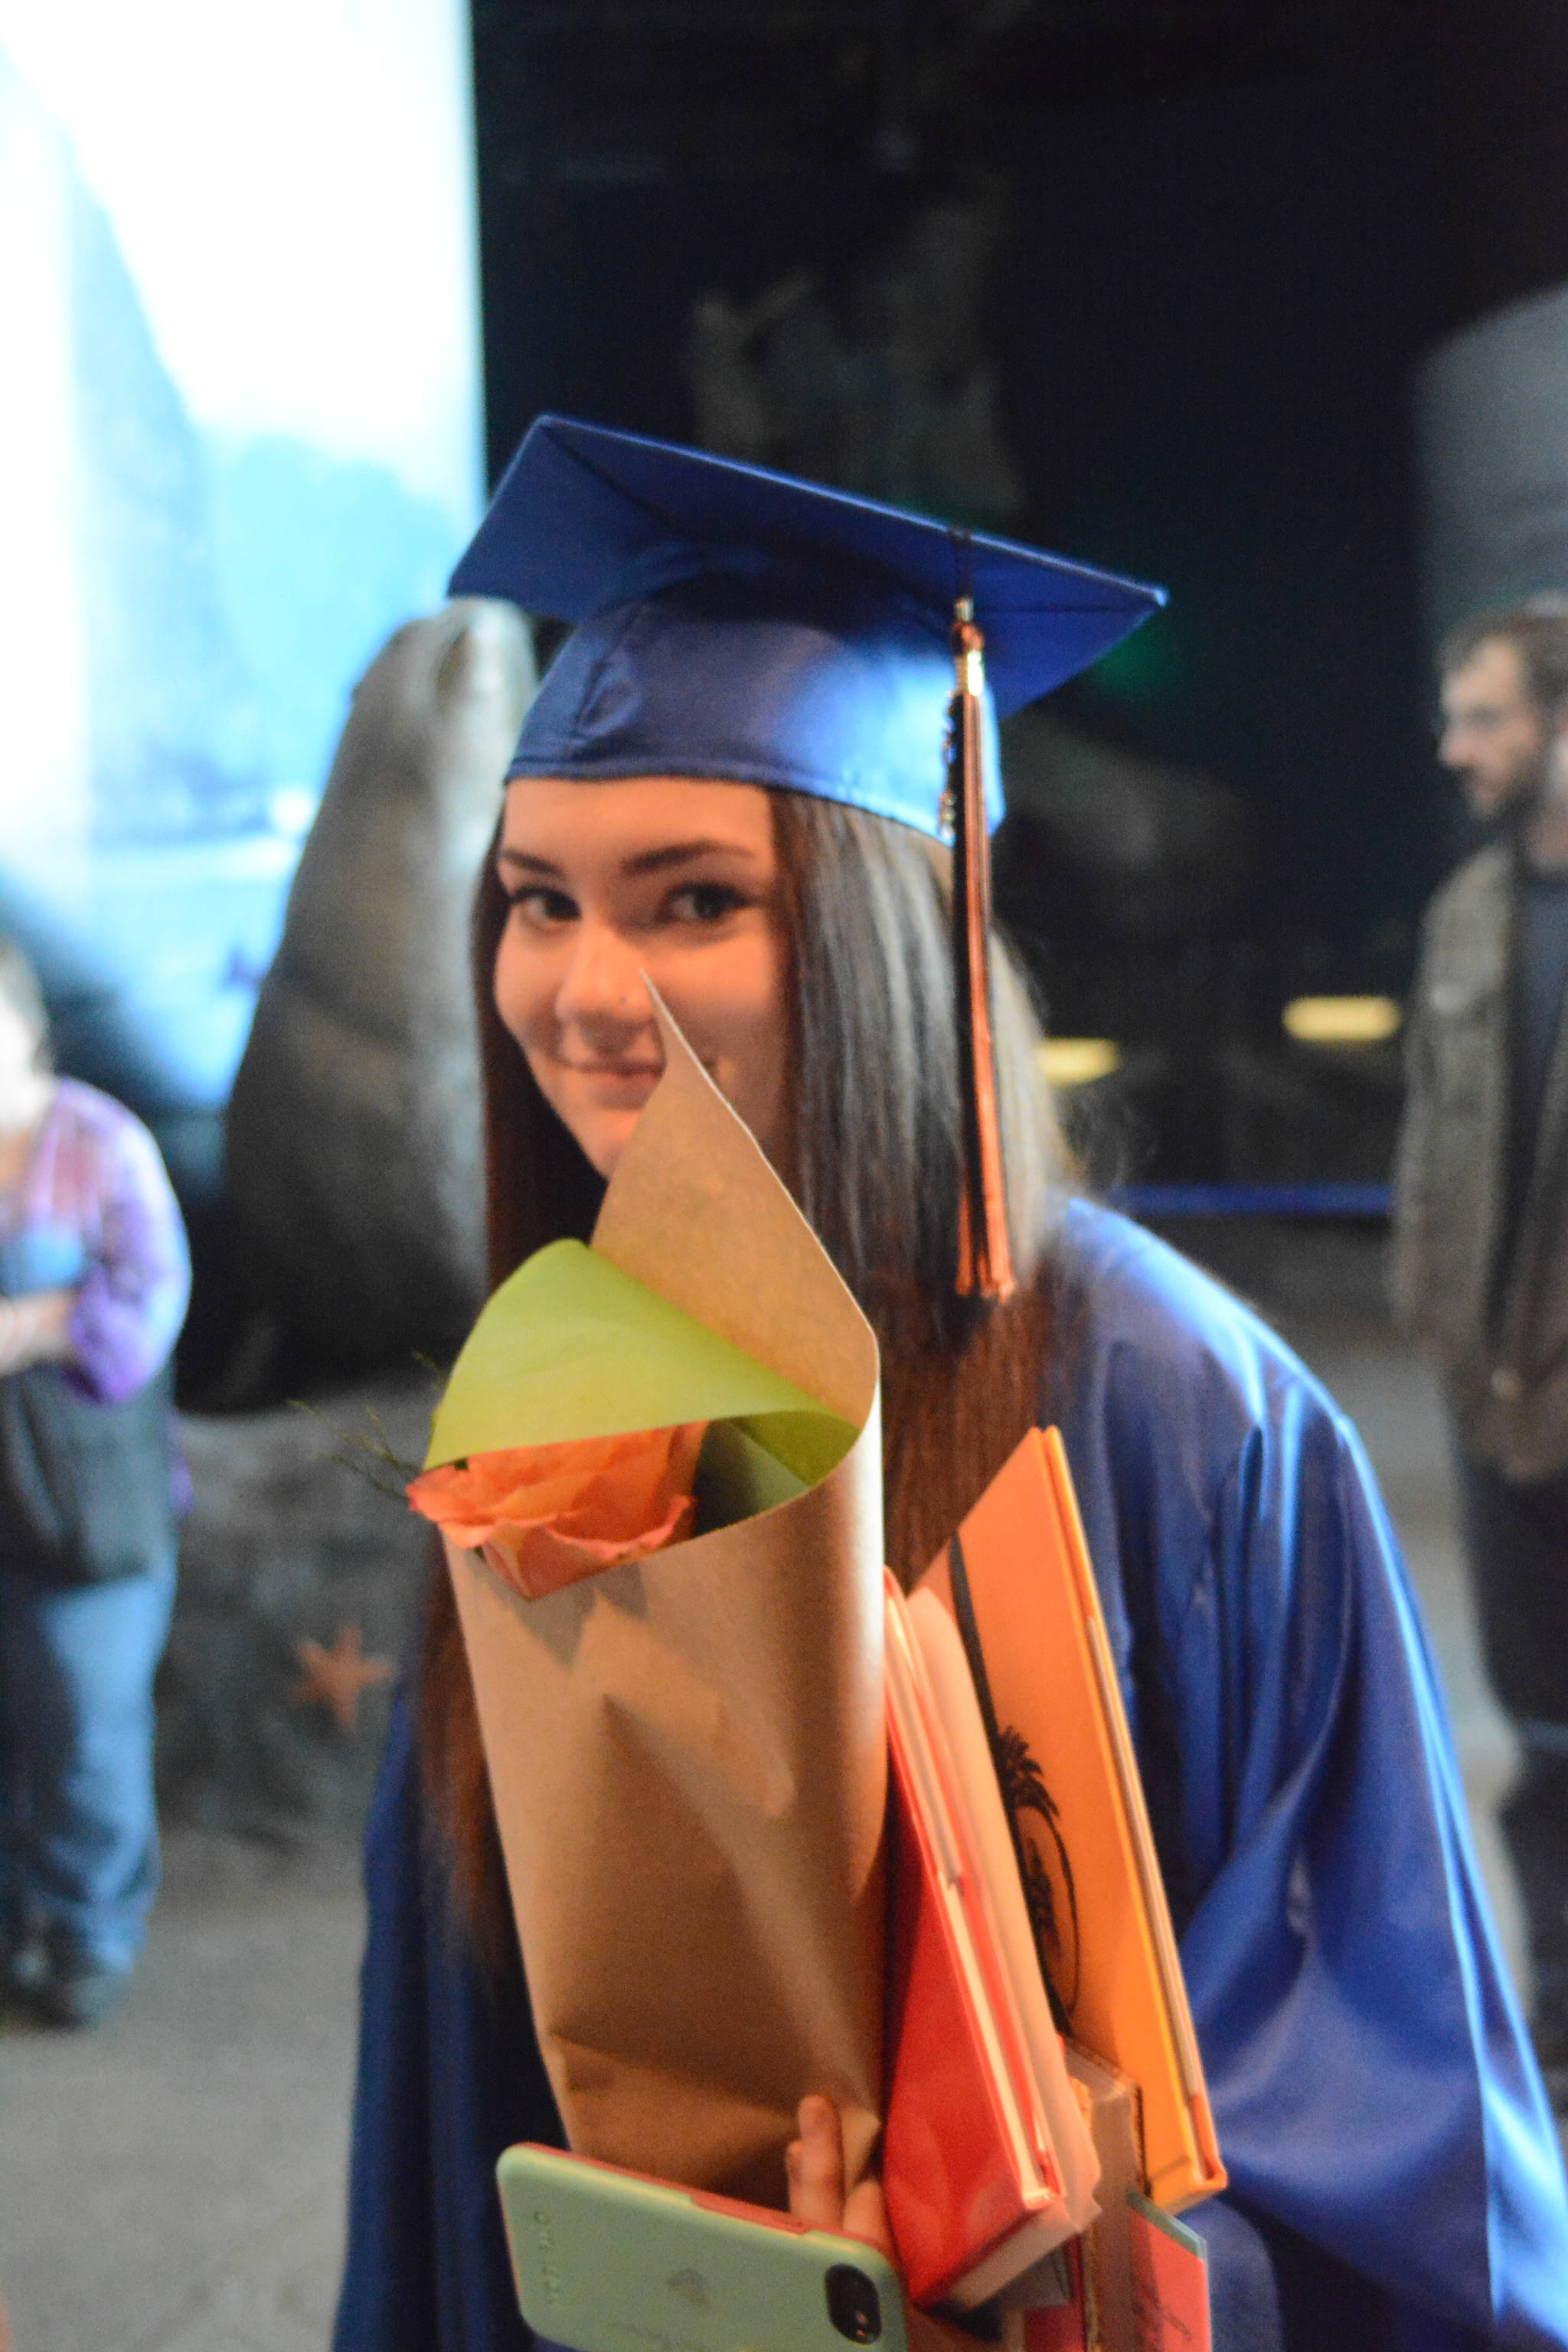 Flex High School graduate Emily Baylink holds roses and gift books after graduating. Nine students graduated from Flex on Tuesday night, May 22, 2018, at the Alaska Islands and Ocean Visitor Center auditorium, Homer, Alaska. (Photo by Michael Armstrong / Homer News)